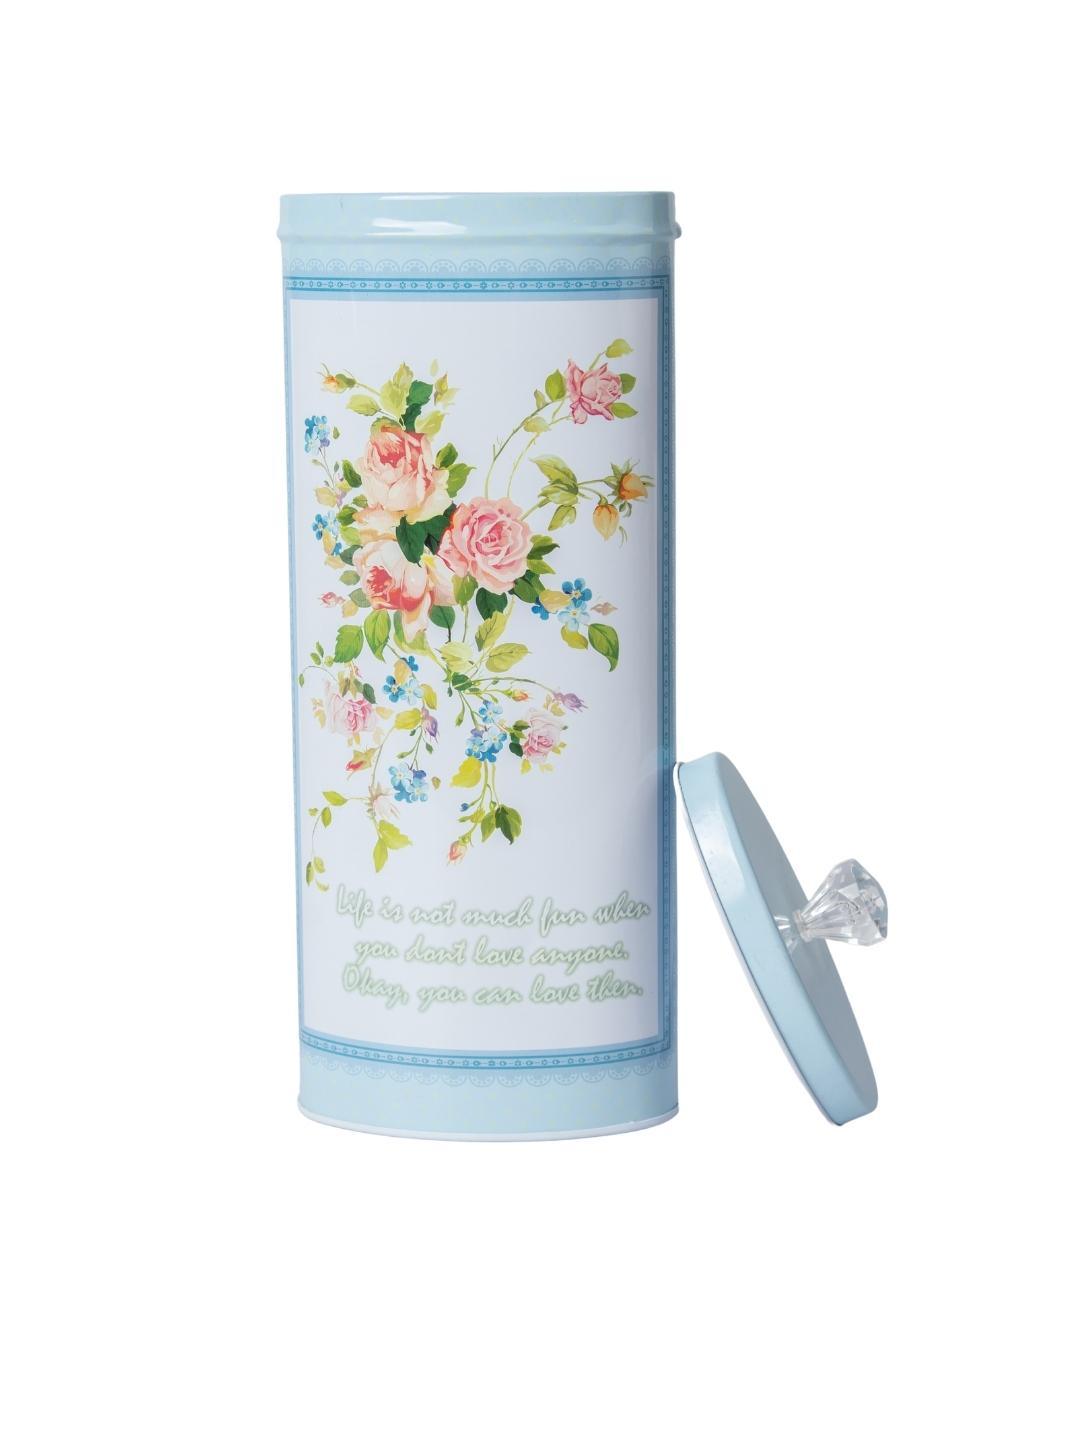 Light Blue Dry Food Storage Cansister With Lid - Floral Prints